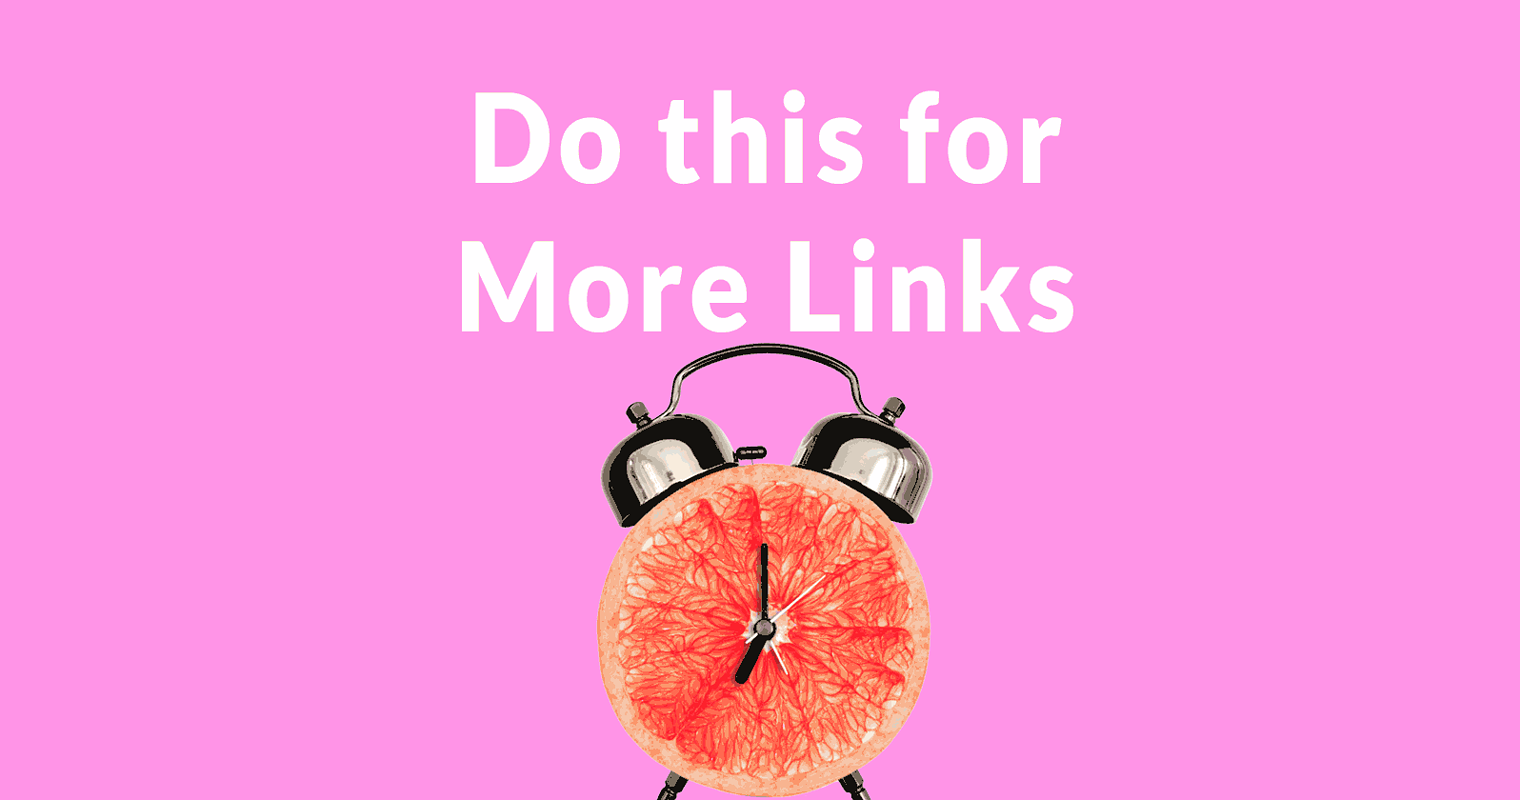 Content Tip that Helps You Get More Links